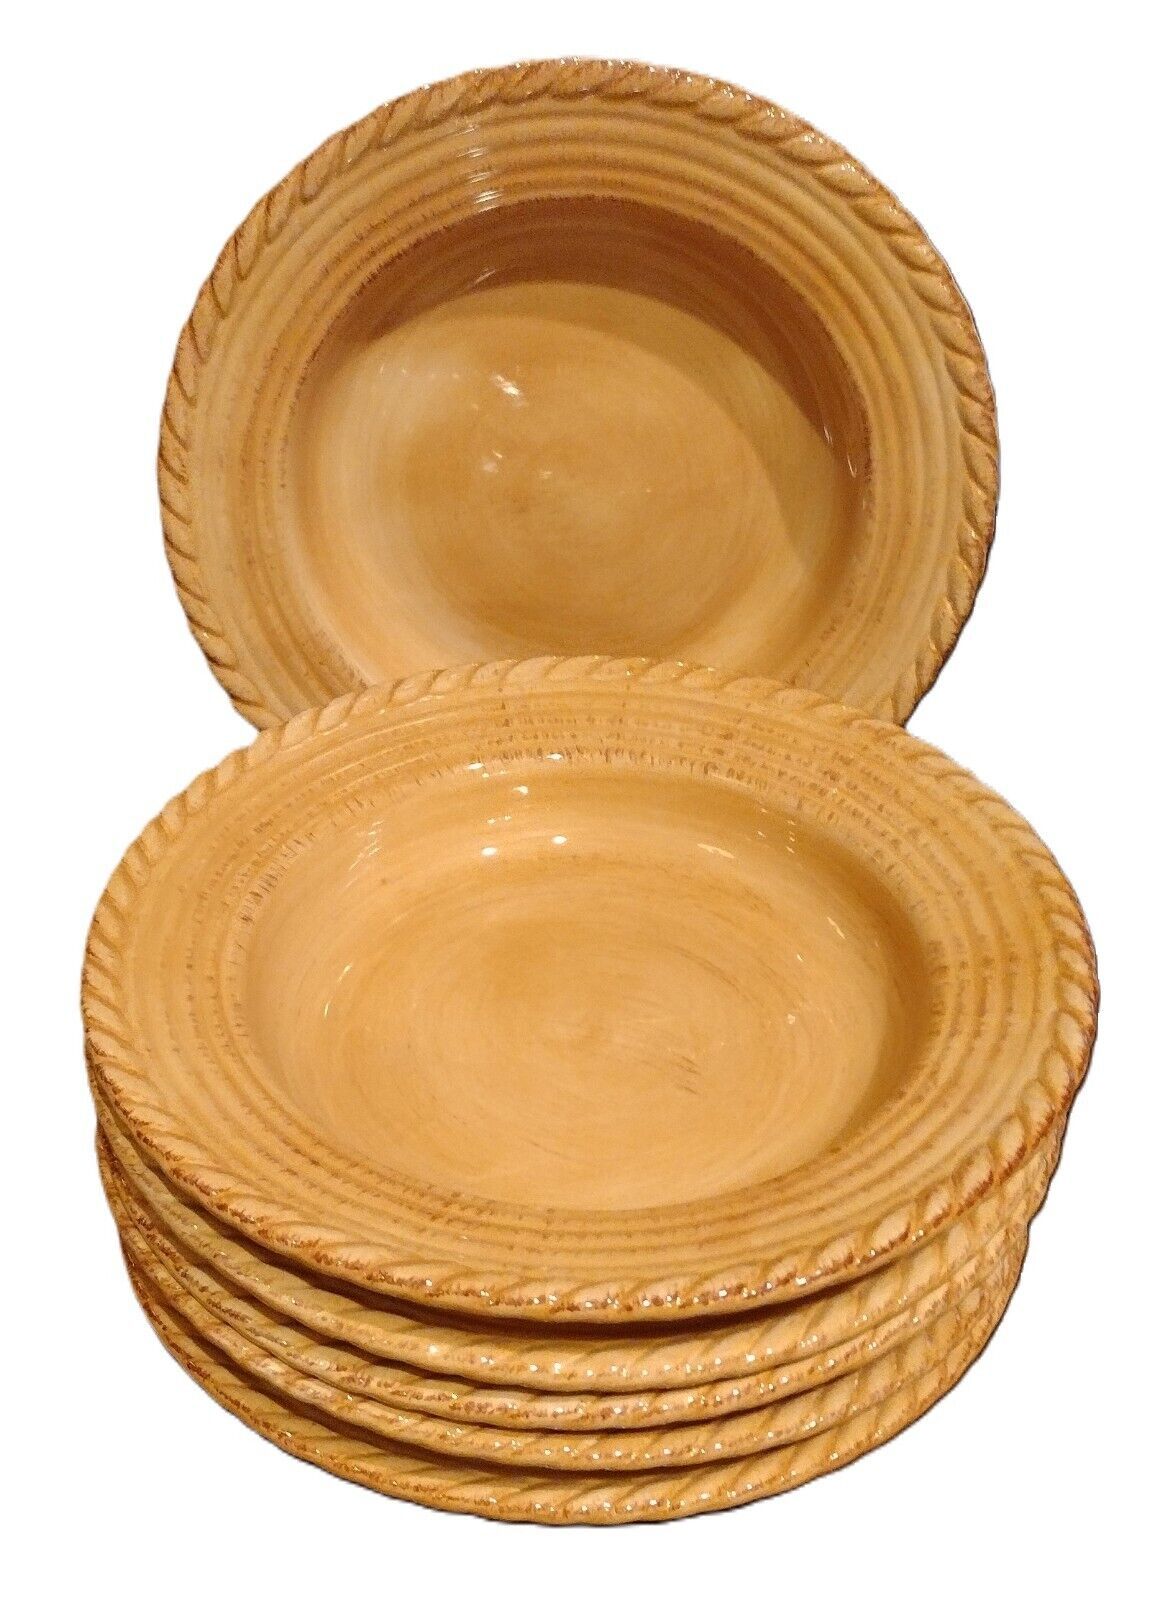 Primary image for Z Gallerie Lucca Rimmed Pasta/Salad Bowl Hand Painted Rope Rim 6pc (1 chip)